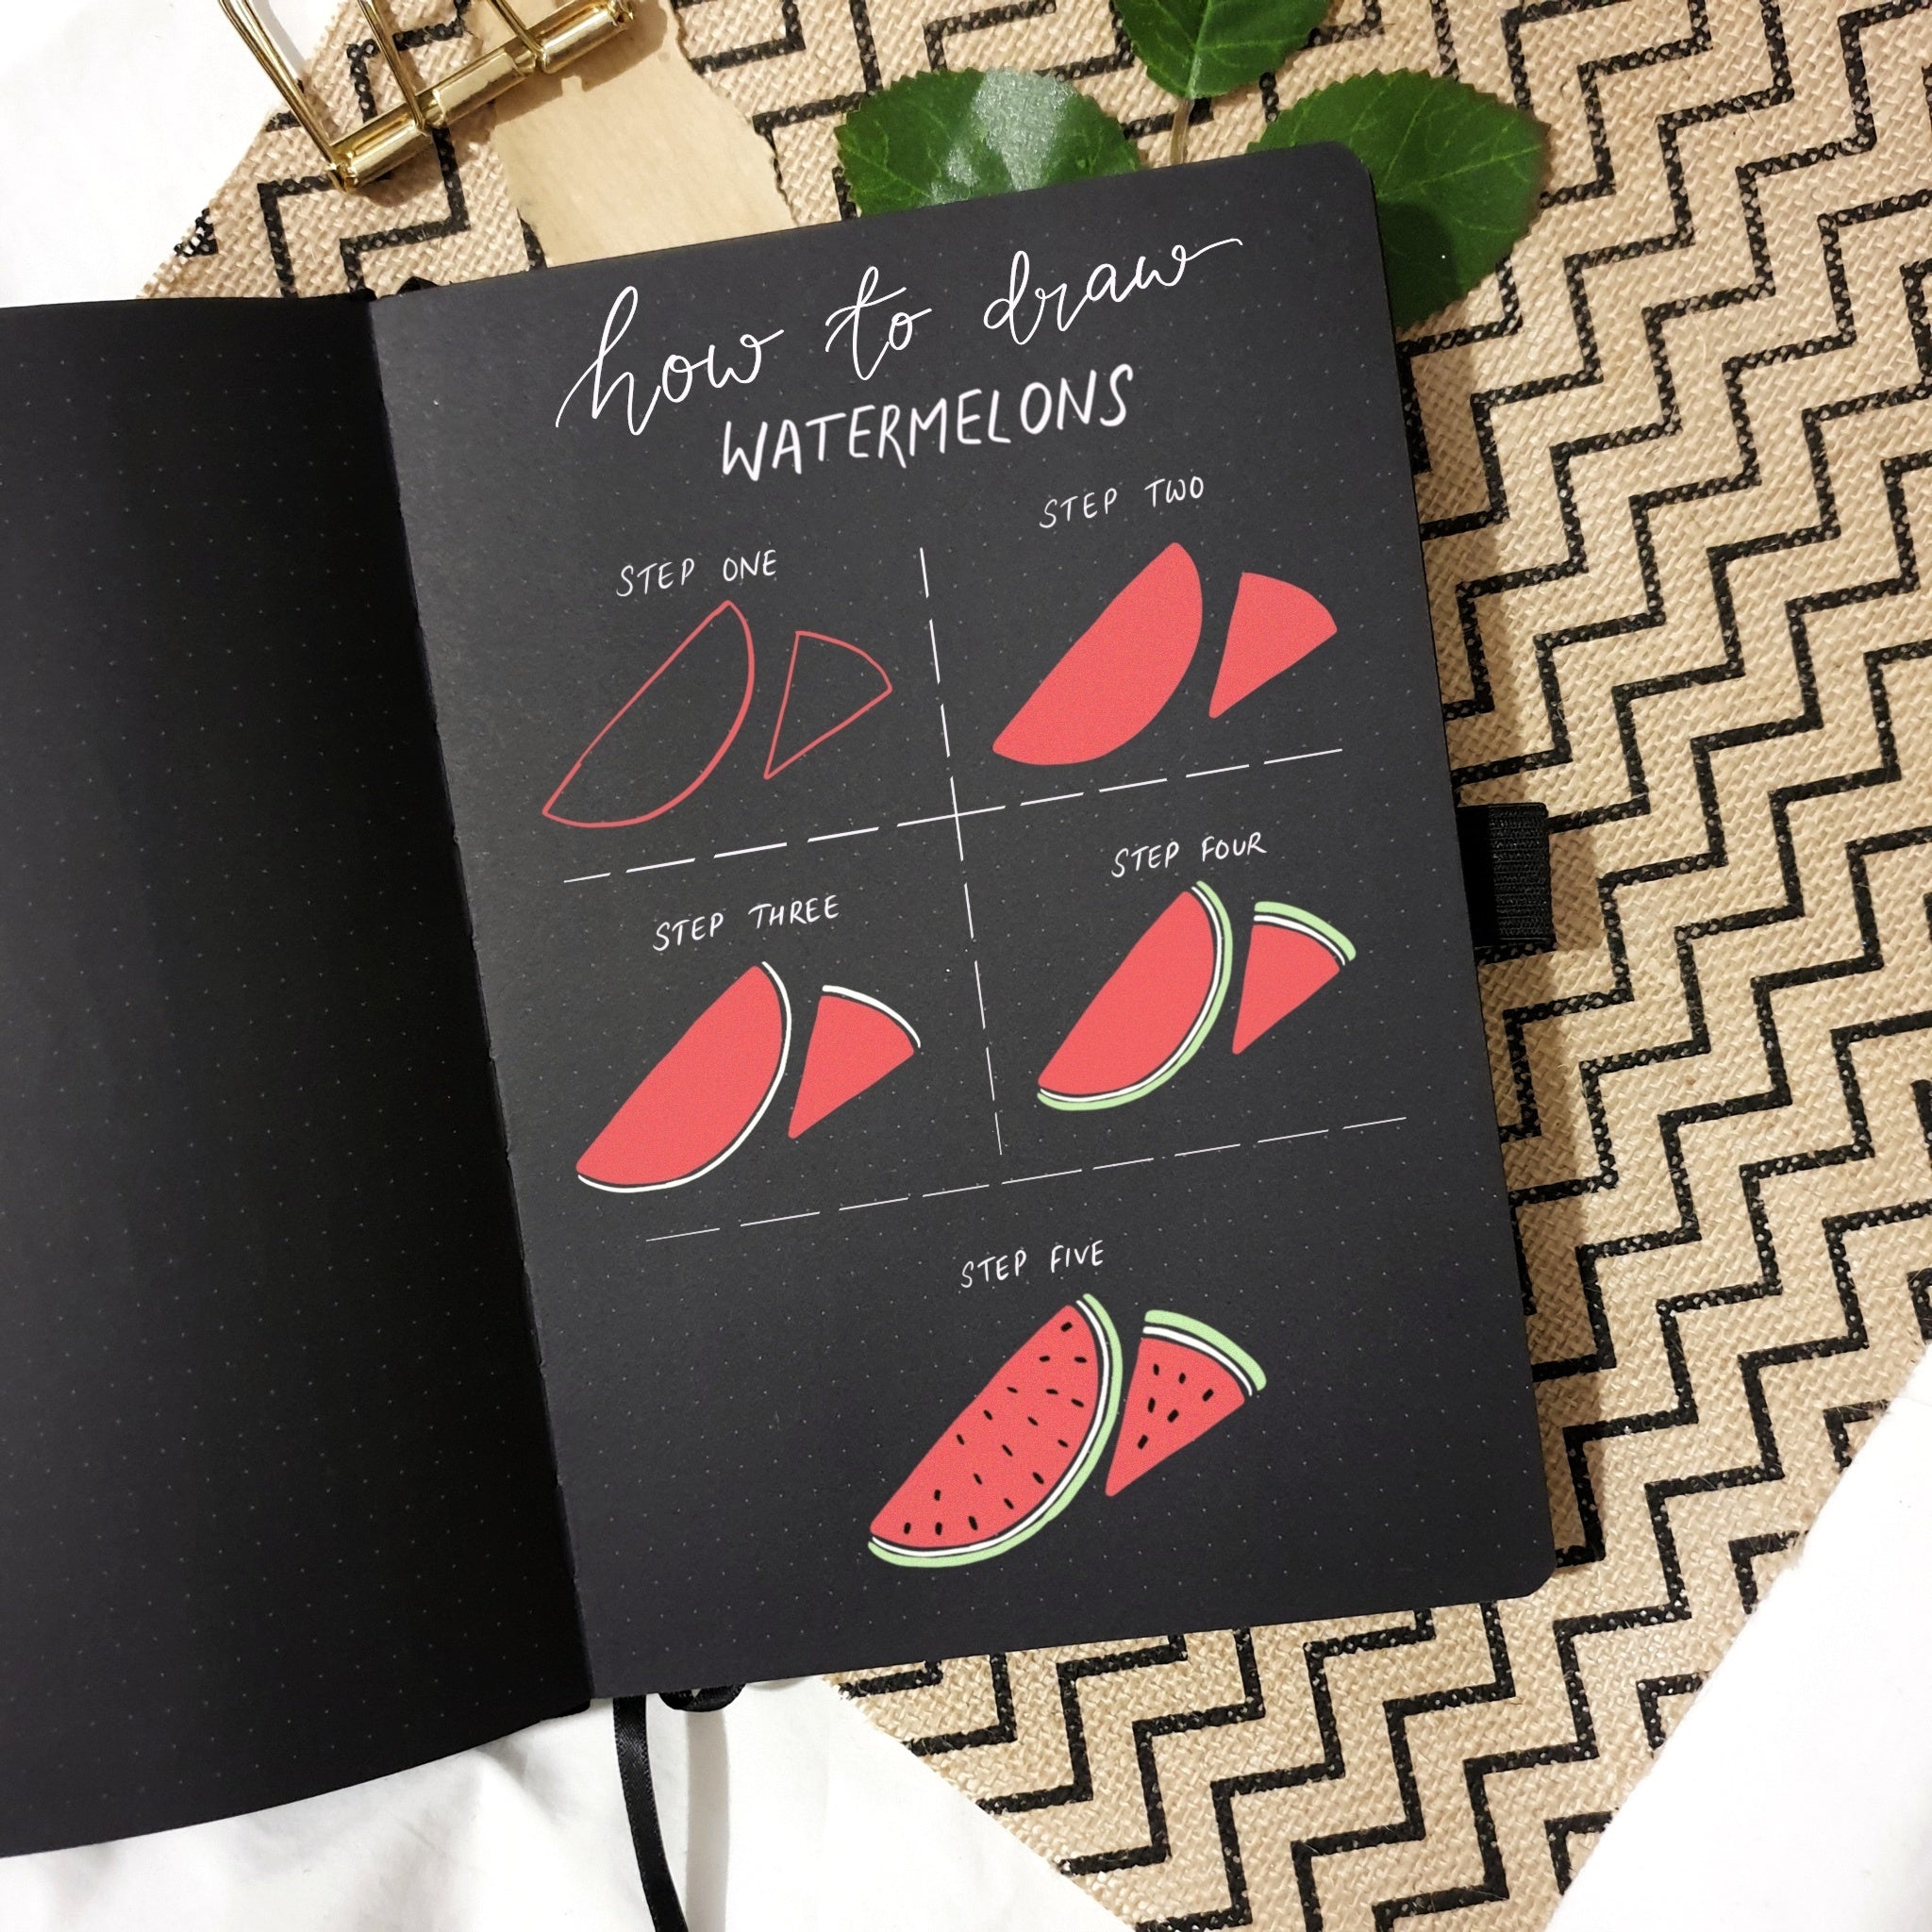 Blackout Book - How to Draw Watermelons